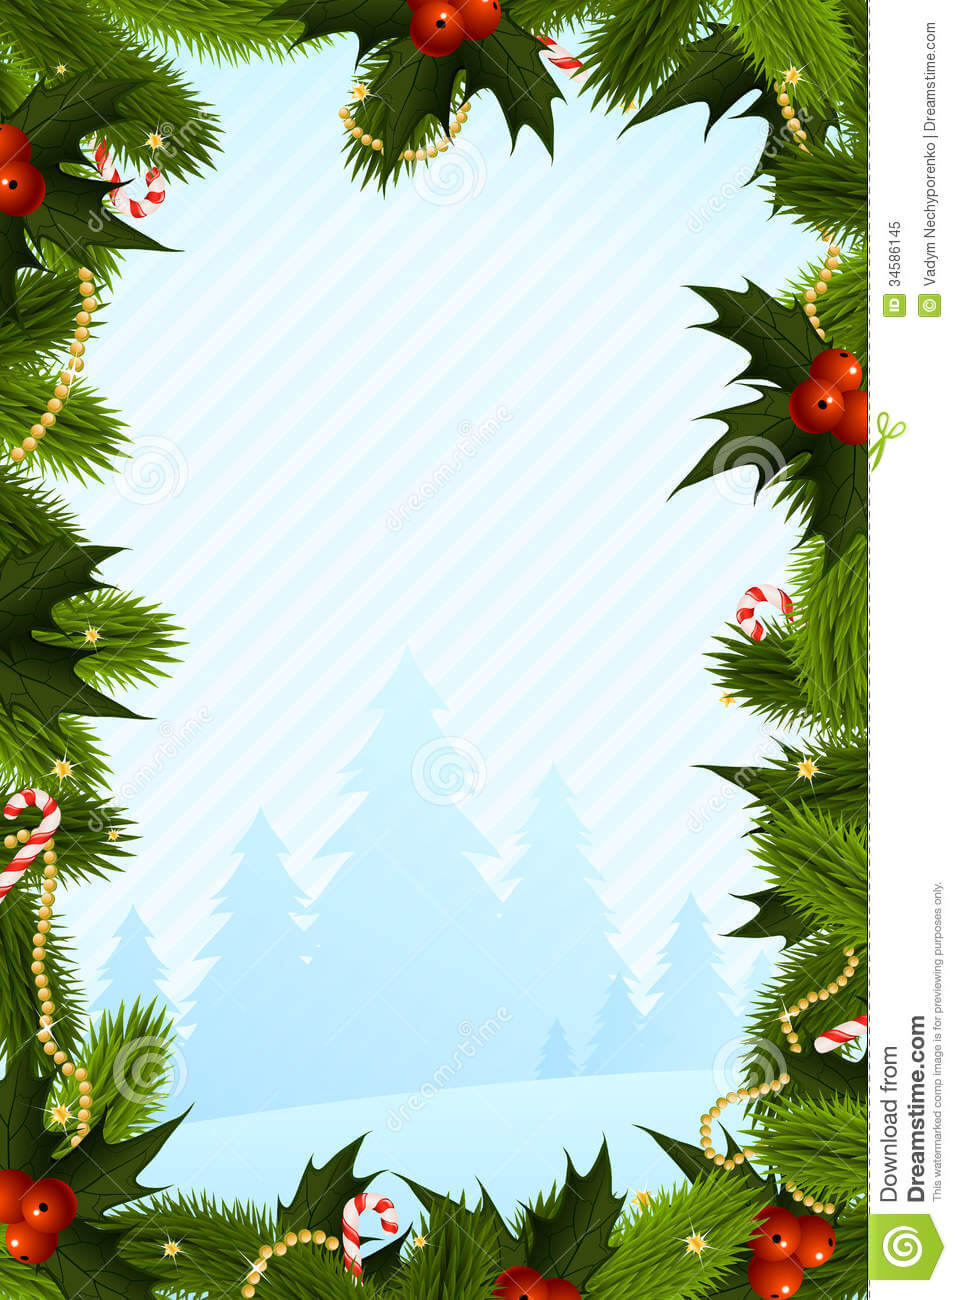 Christmas Card Template Stock Vector. Illustration Of Shape Intended For Blank Christmas Card Templates Free